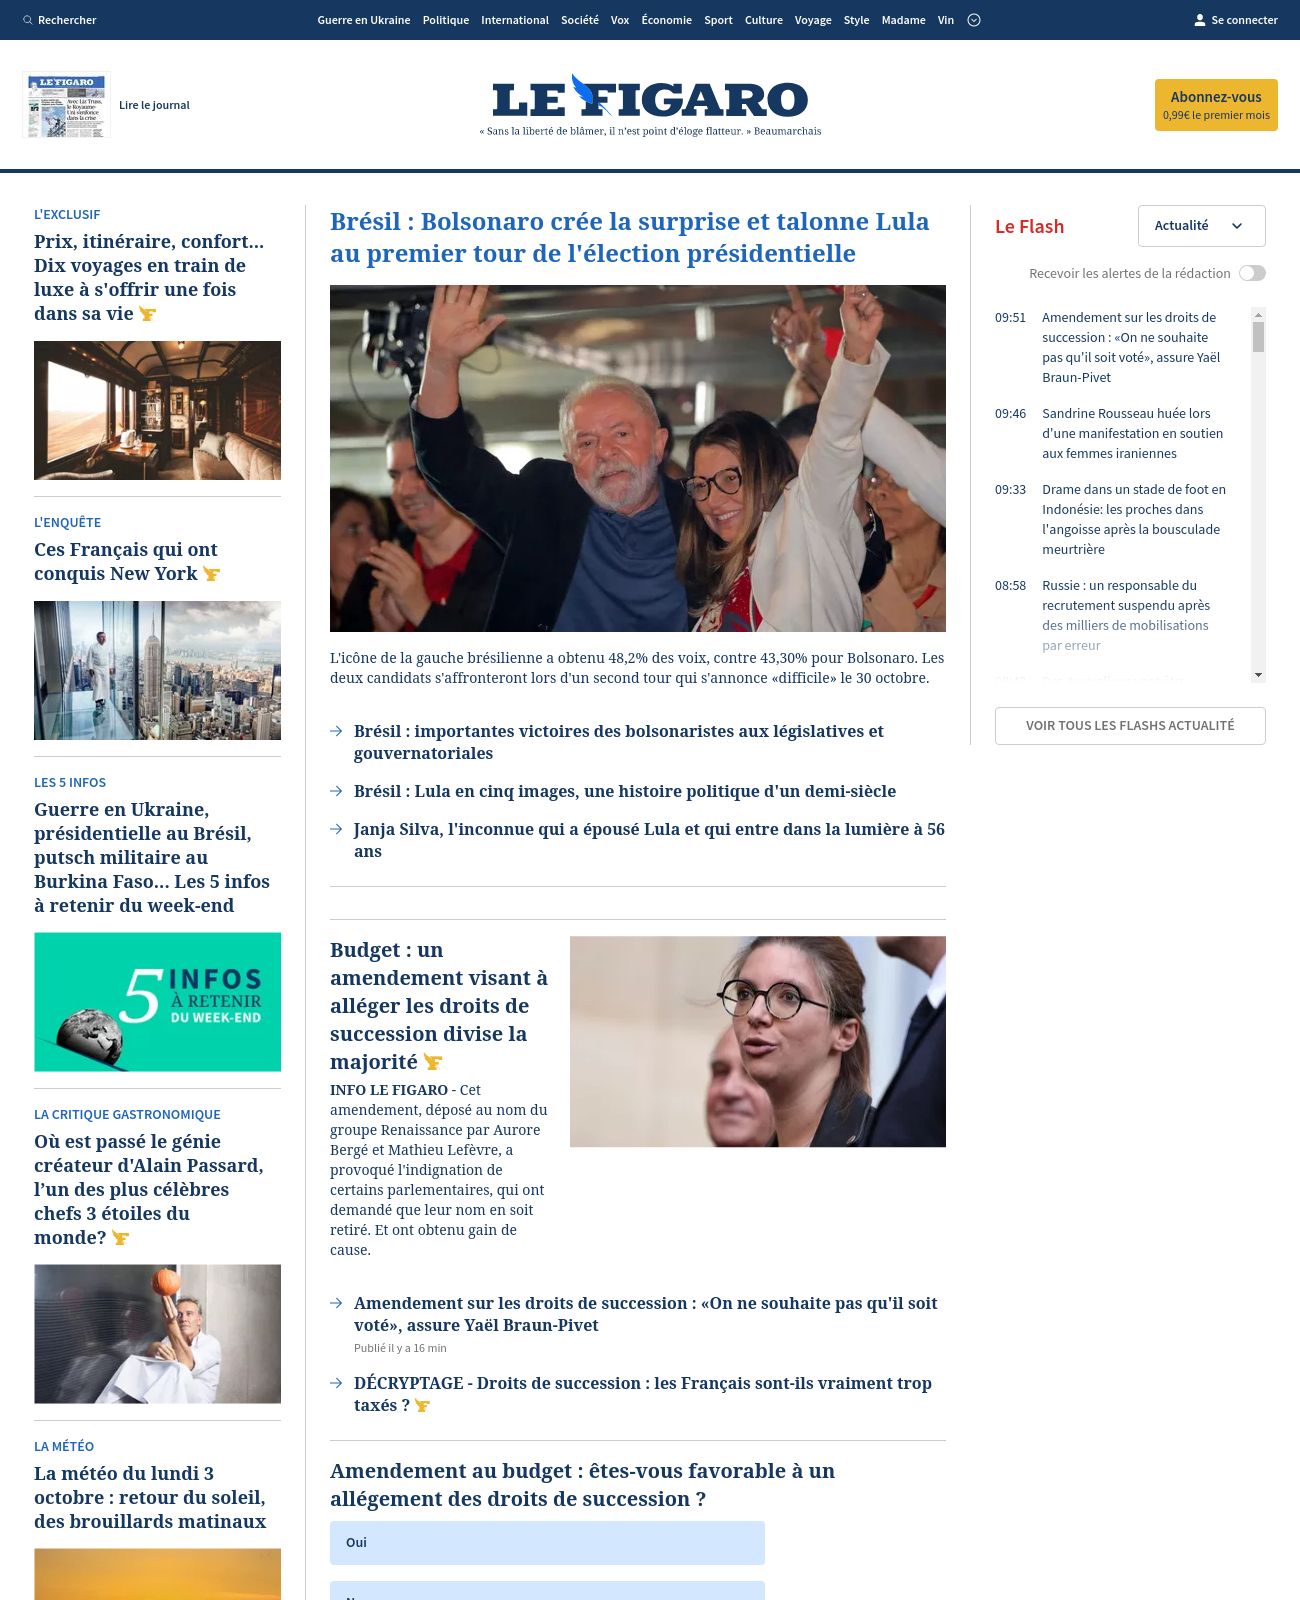 Le Figaro at 2022-10-03 10:16:17+02:00 local time